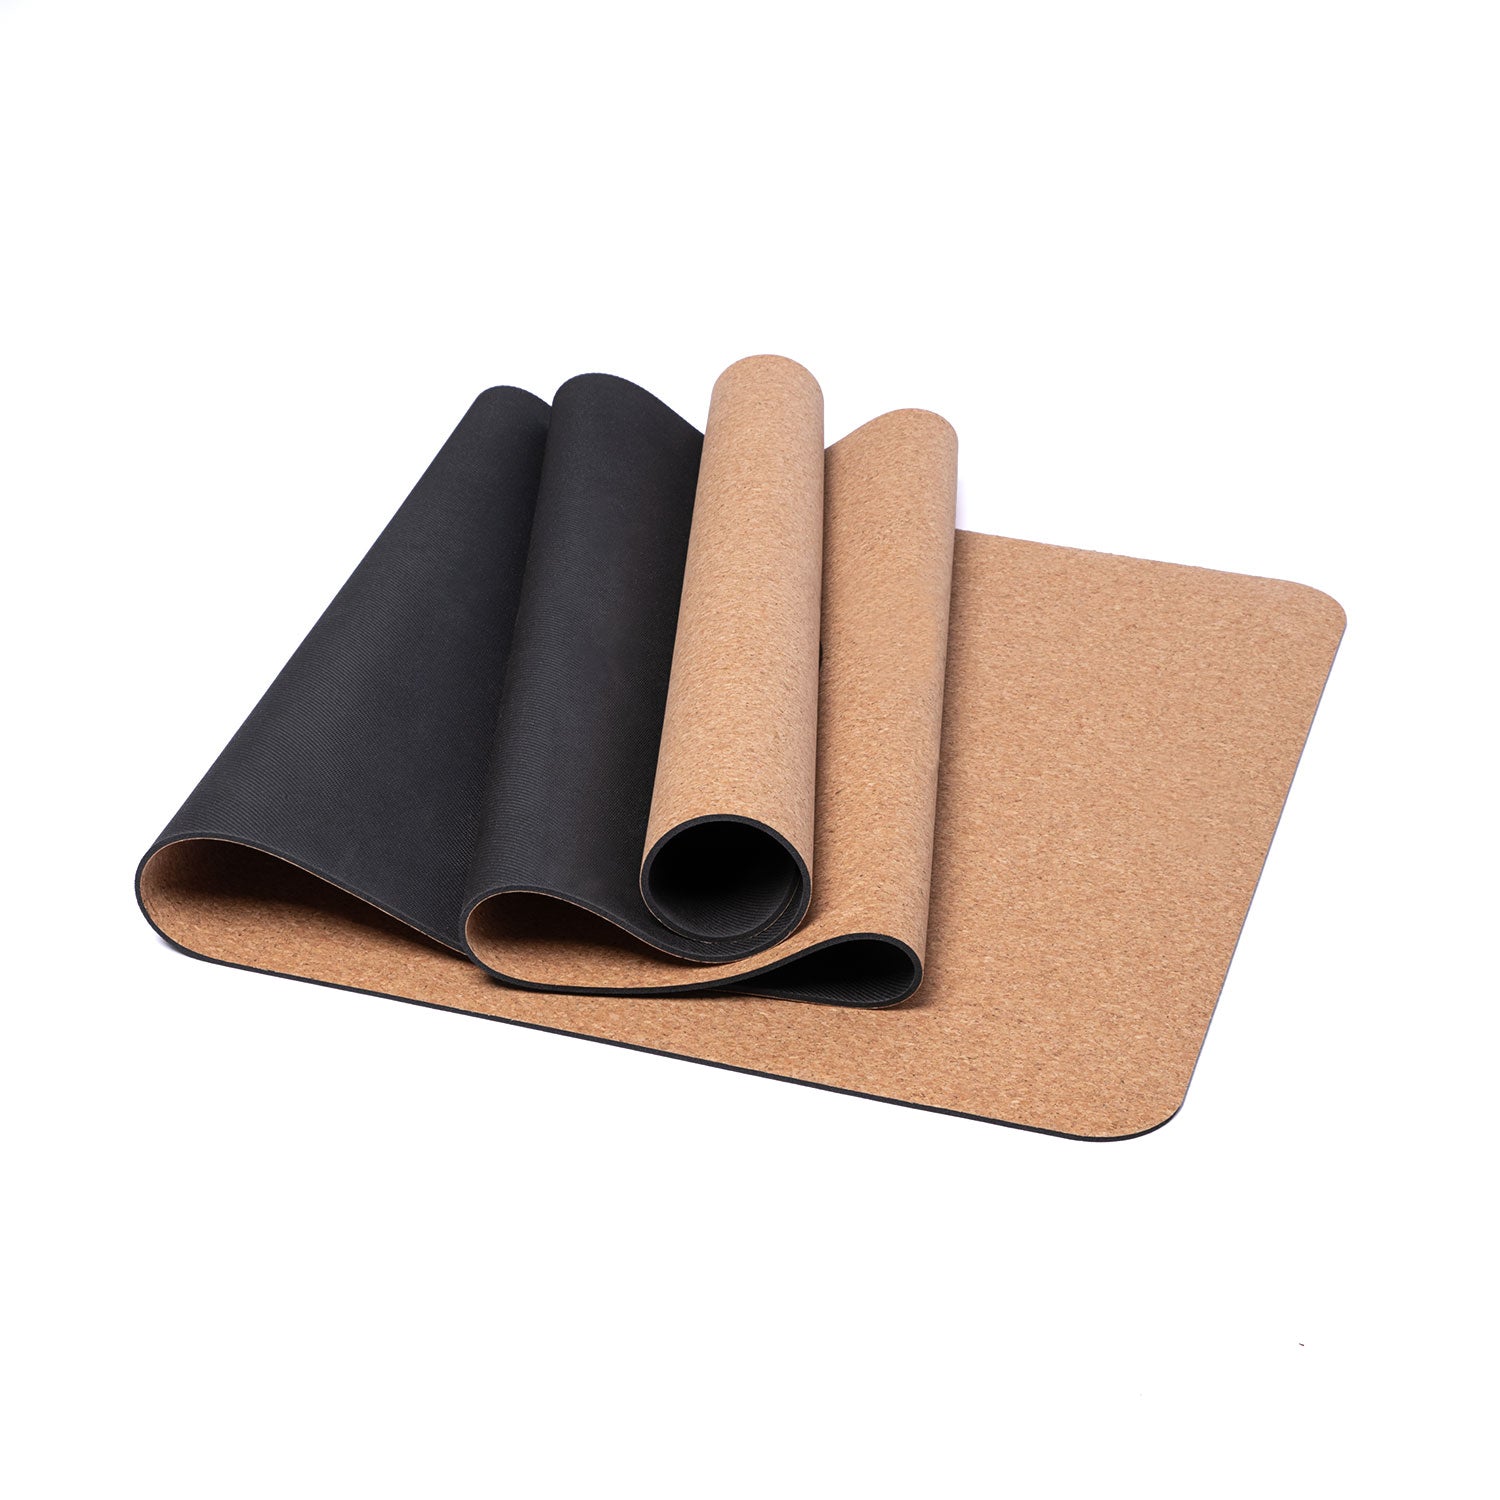 Gaiam Yoga Mat Cork with Non-Toxic Rubber Backing, Natural Sustainable Cork  Resists Germs and Odor(68-Inch x 24-Inch x 5mm Thick), Sports & Outdoors -   Canada